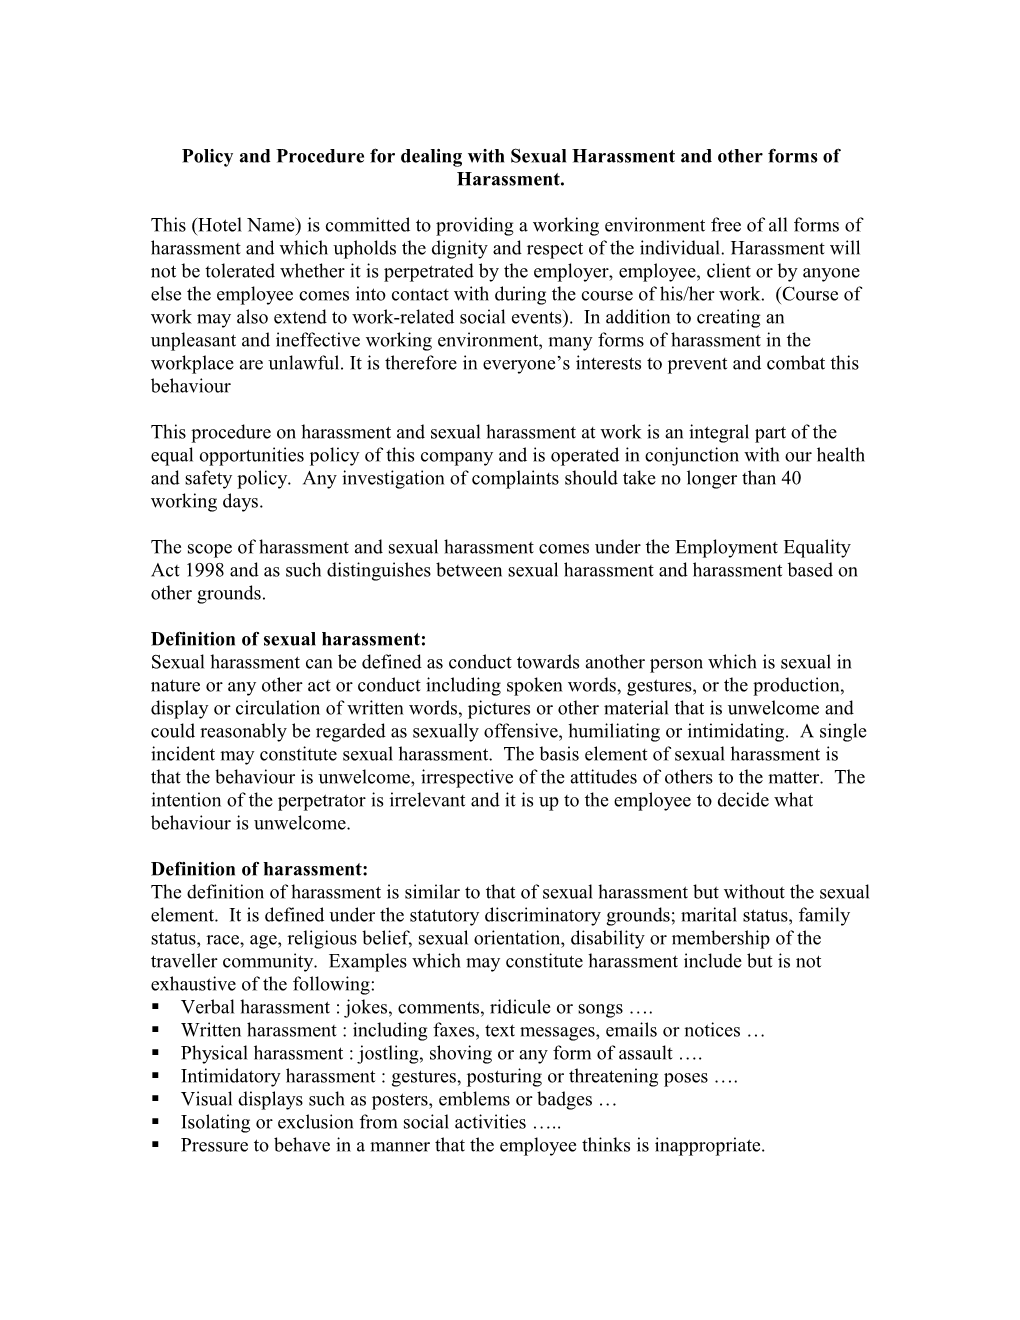 Policy and Procedure for Dealing with Sexual Harassment and Other Forms of Harassment